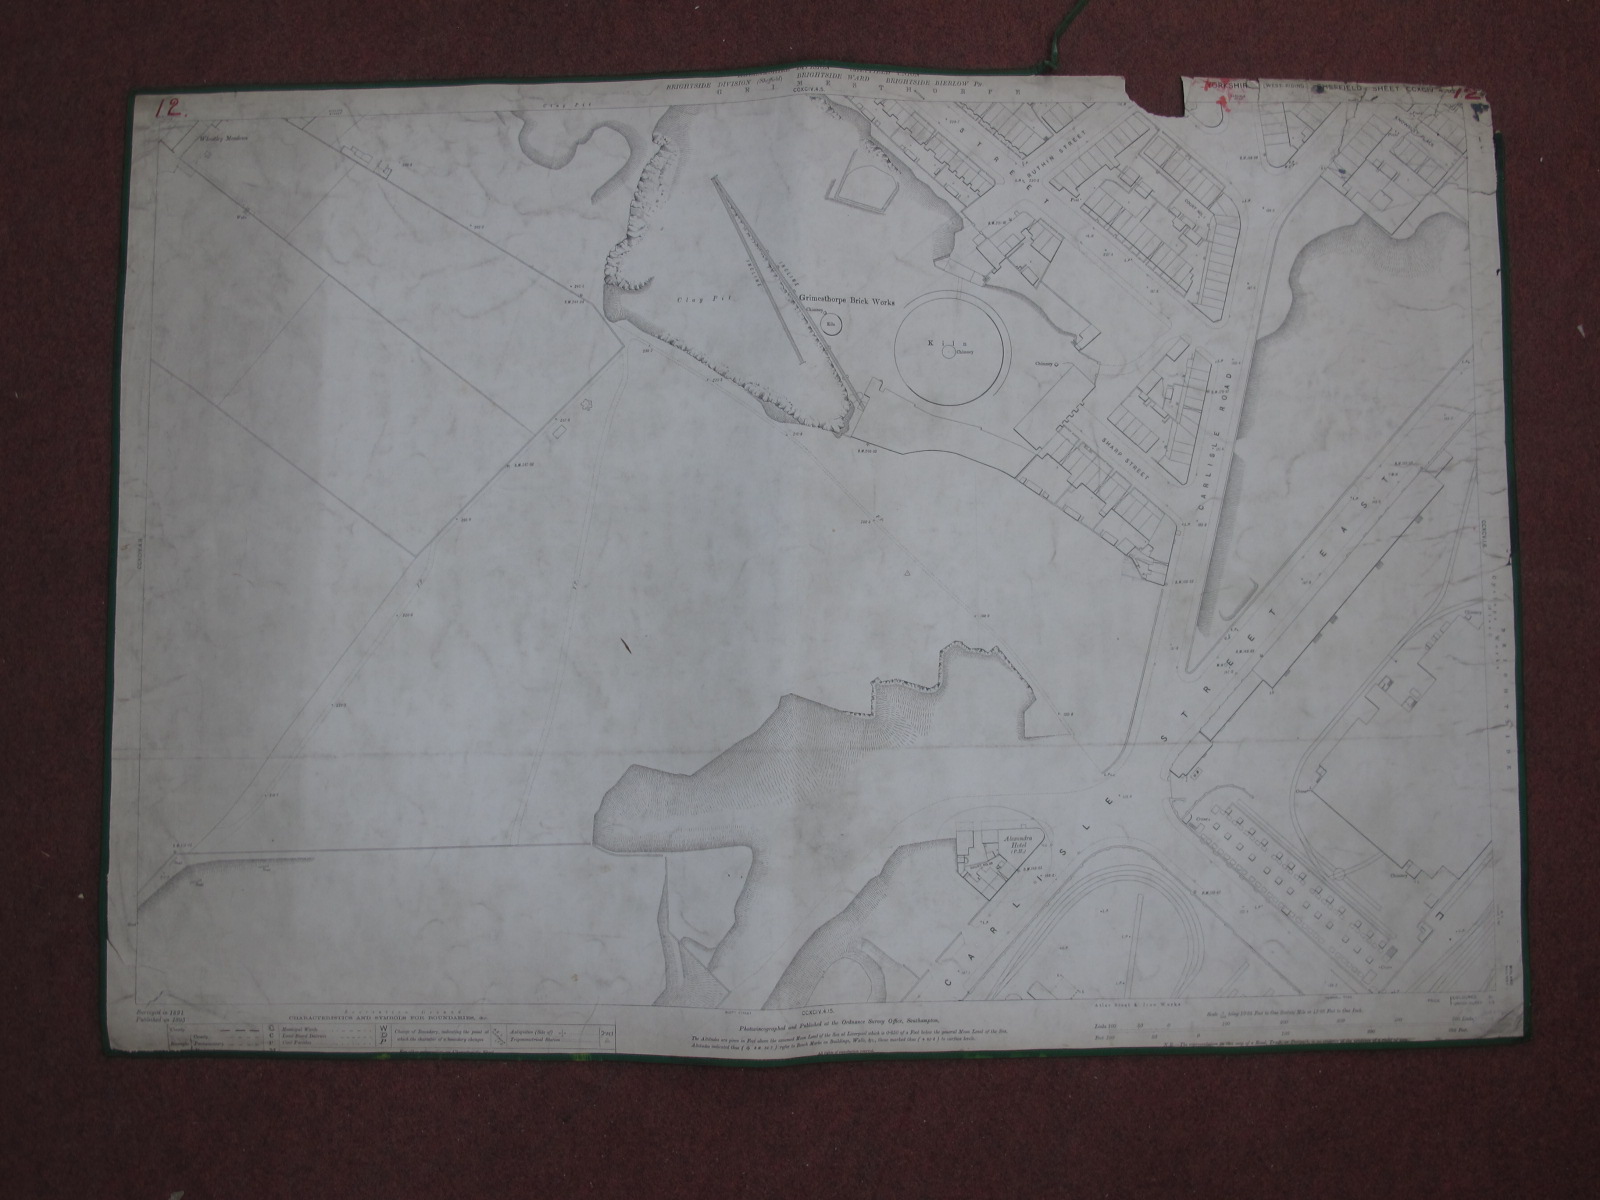 Sheffield Maps, Brightside, Burngreave - some dates noted, 1893, 1890, various scales, dirty and - Image 5 of 10